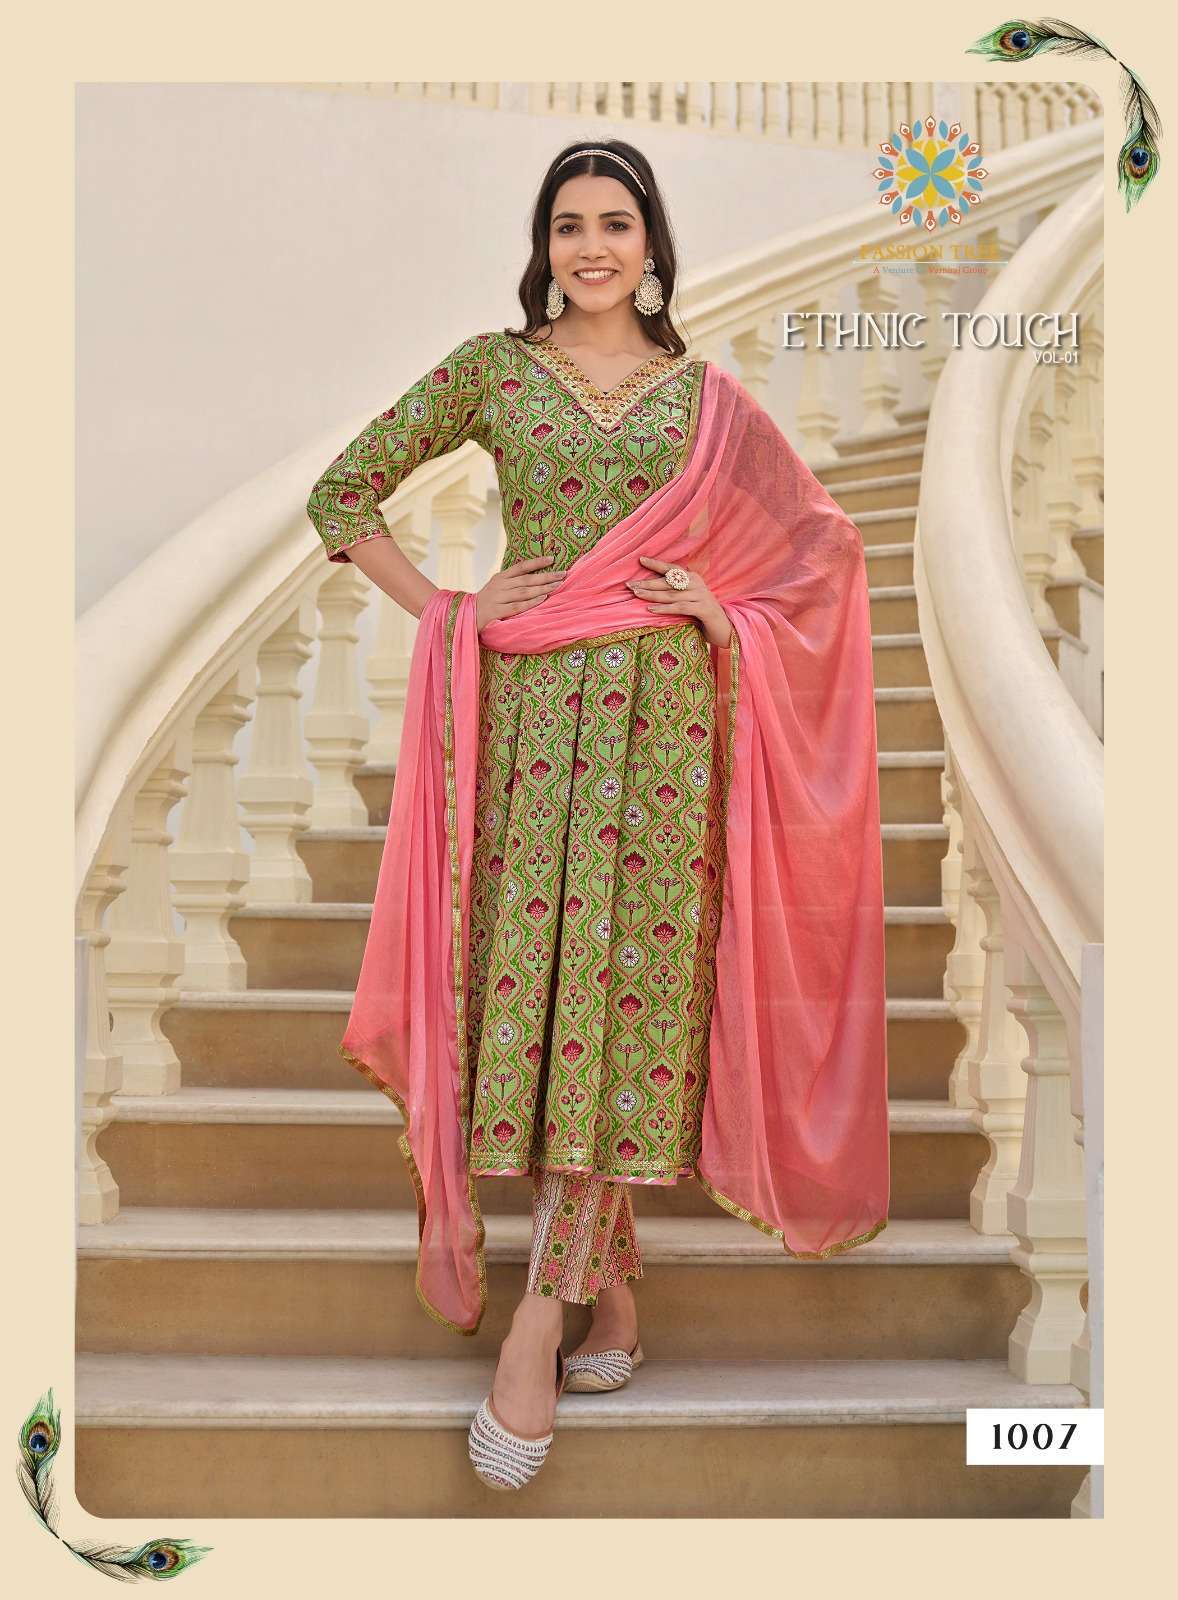 PASSION TREE ETHNIC TOUCH VOL 1  Kurtis exporters in Surat